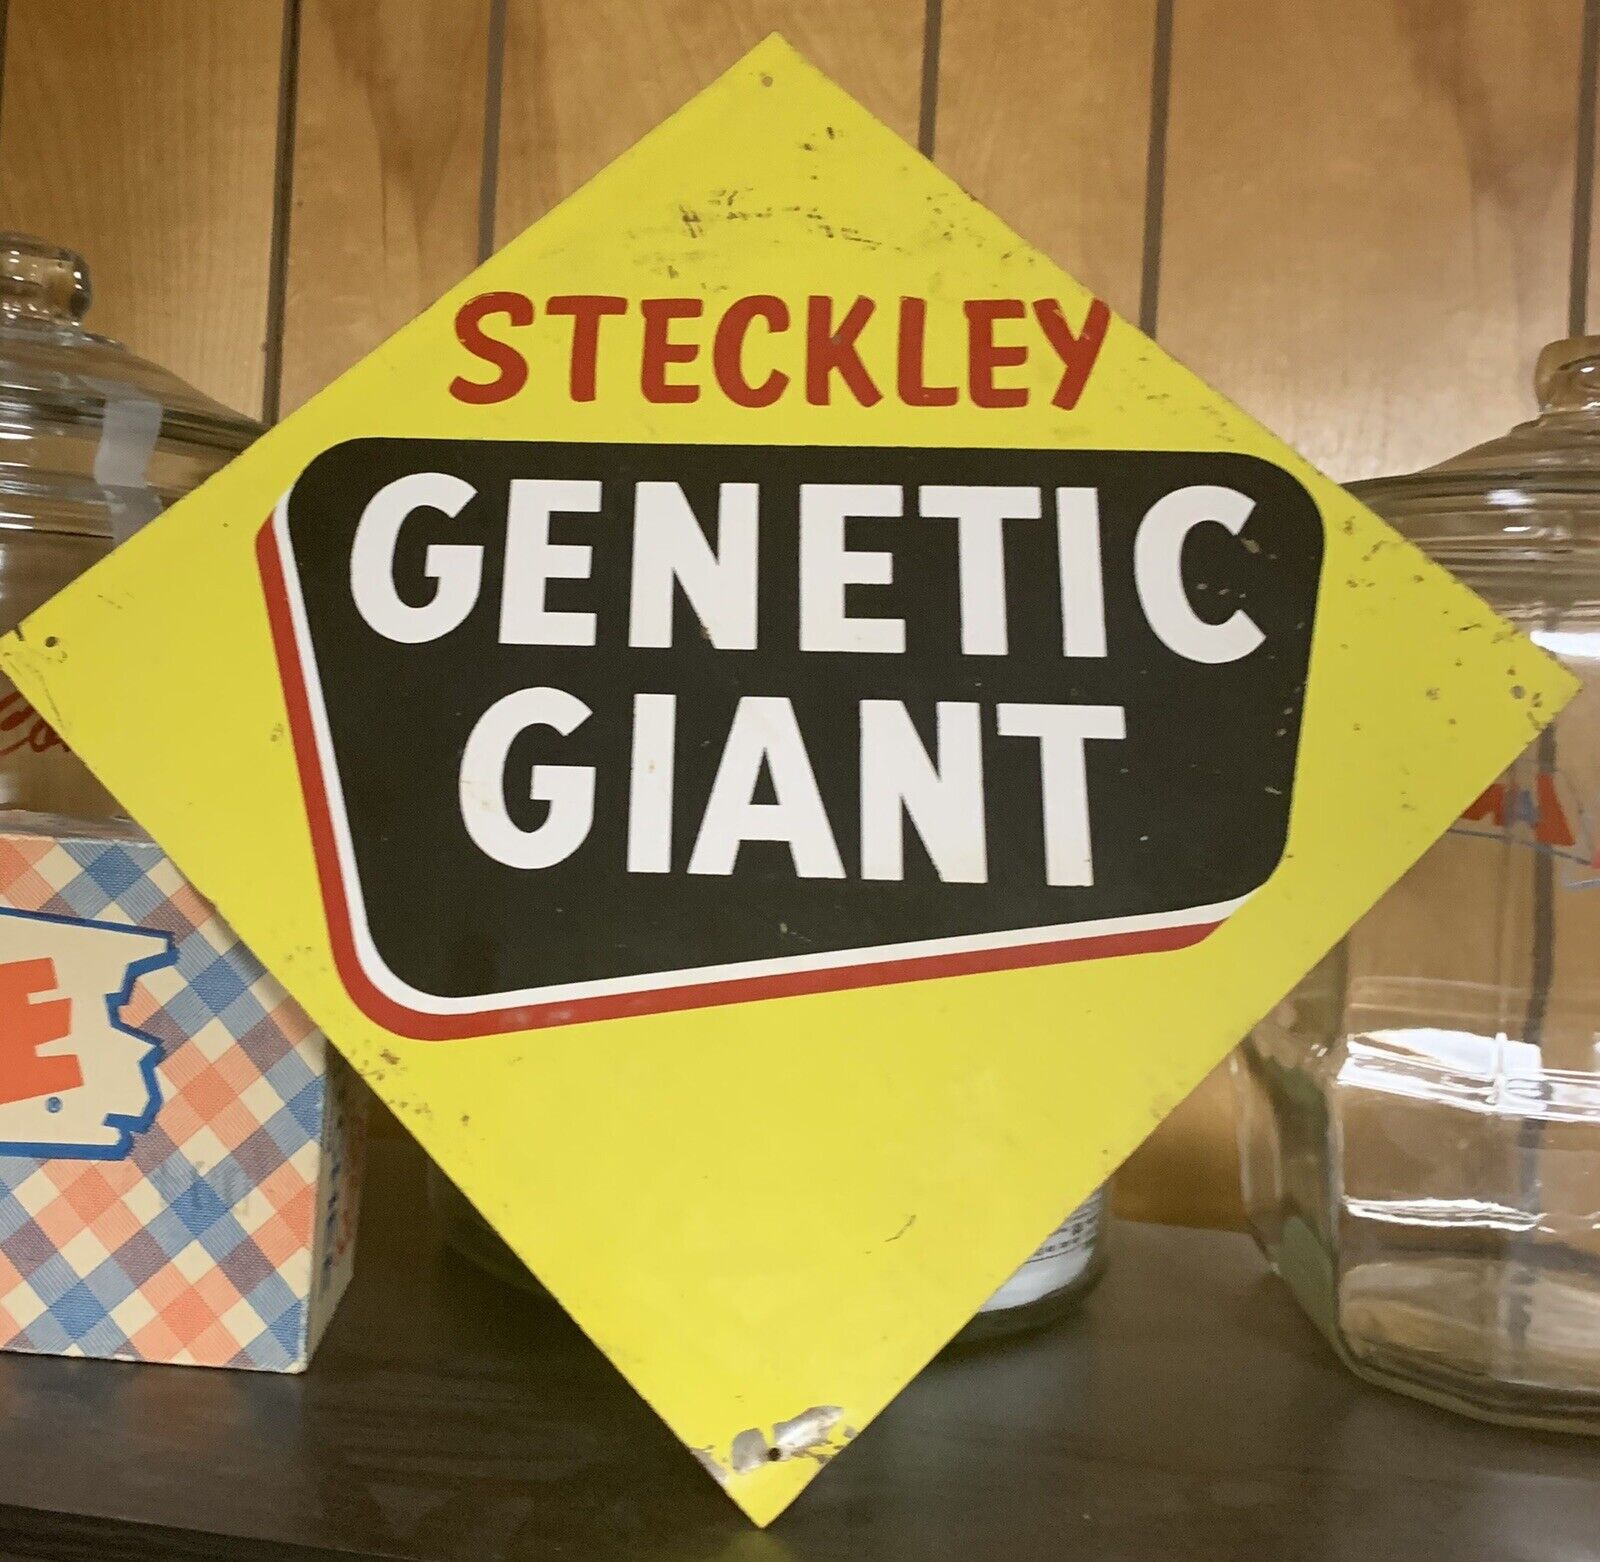 ORIGINAL Vintage STECKLEY GENETIC GIANT Seed Corn Sign Farm Agricultural 12”x12”